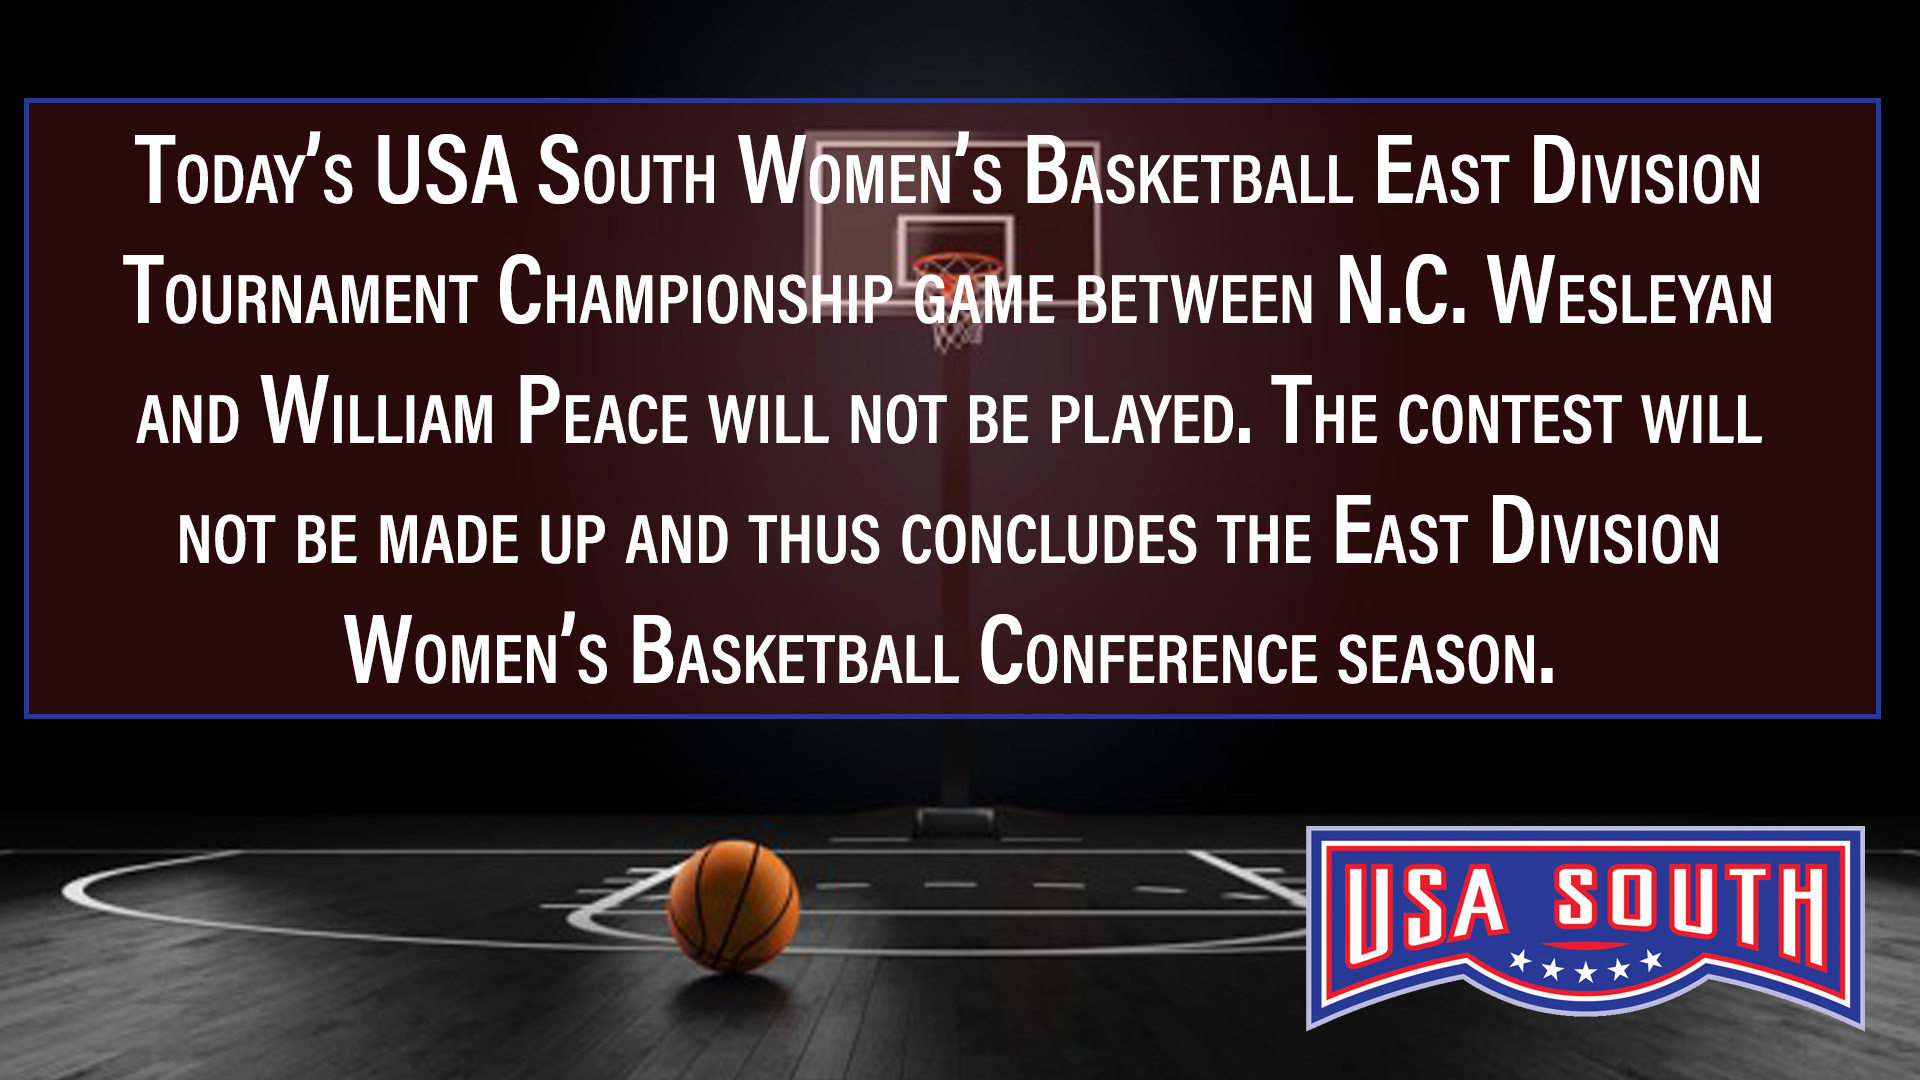 USA South Women's Basketball East Division Title Game Cancelled